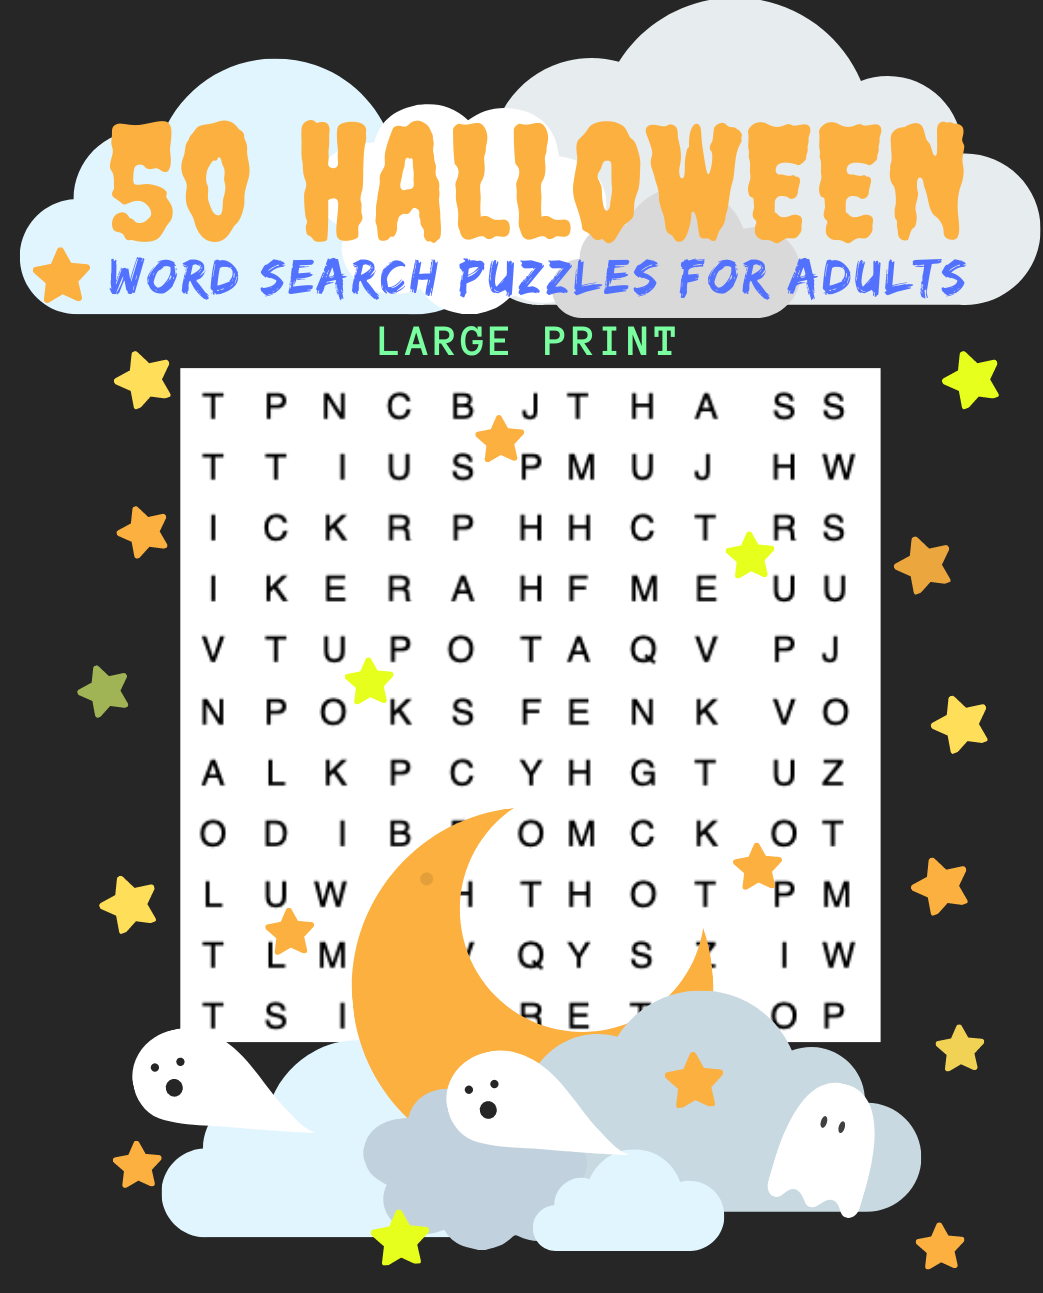 get-your-free-copy-of-50-halloween-word-search-puzzles-for-adults-large-print-by-smiling-family